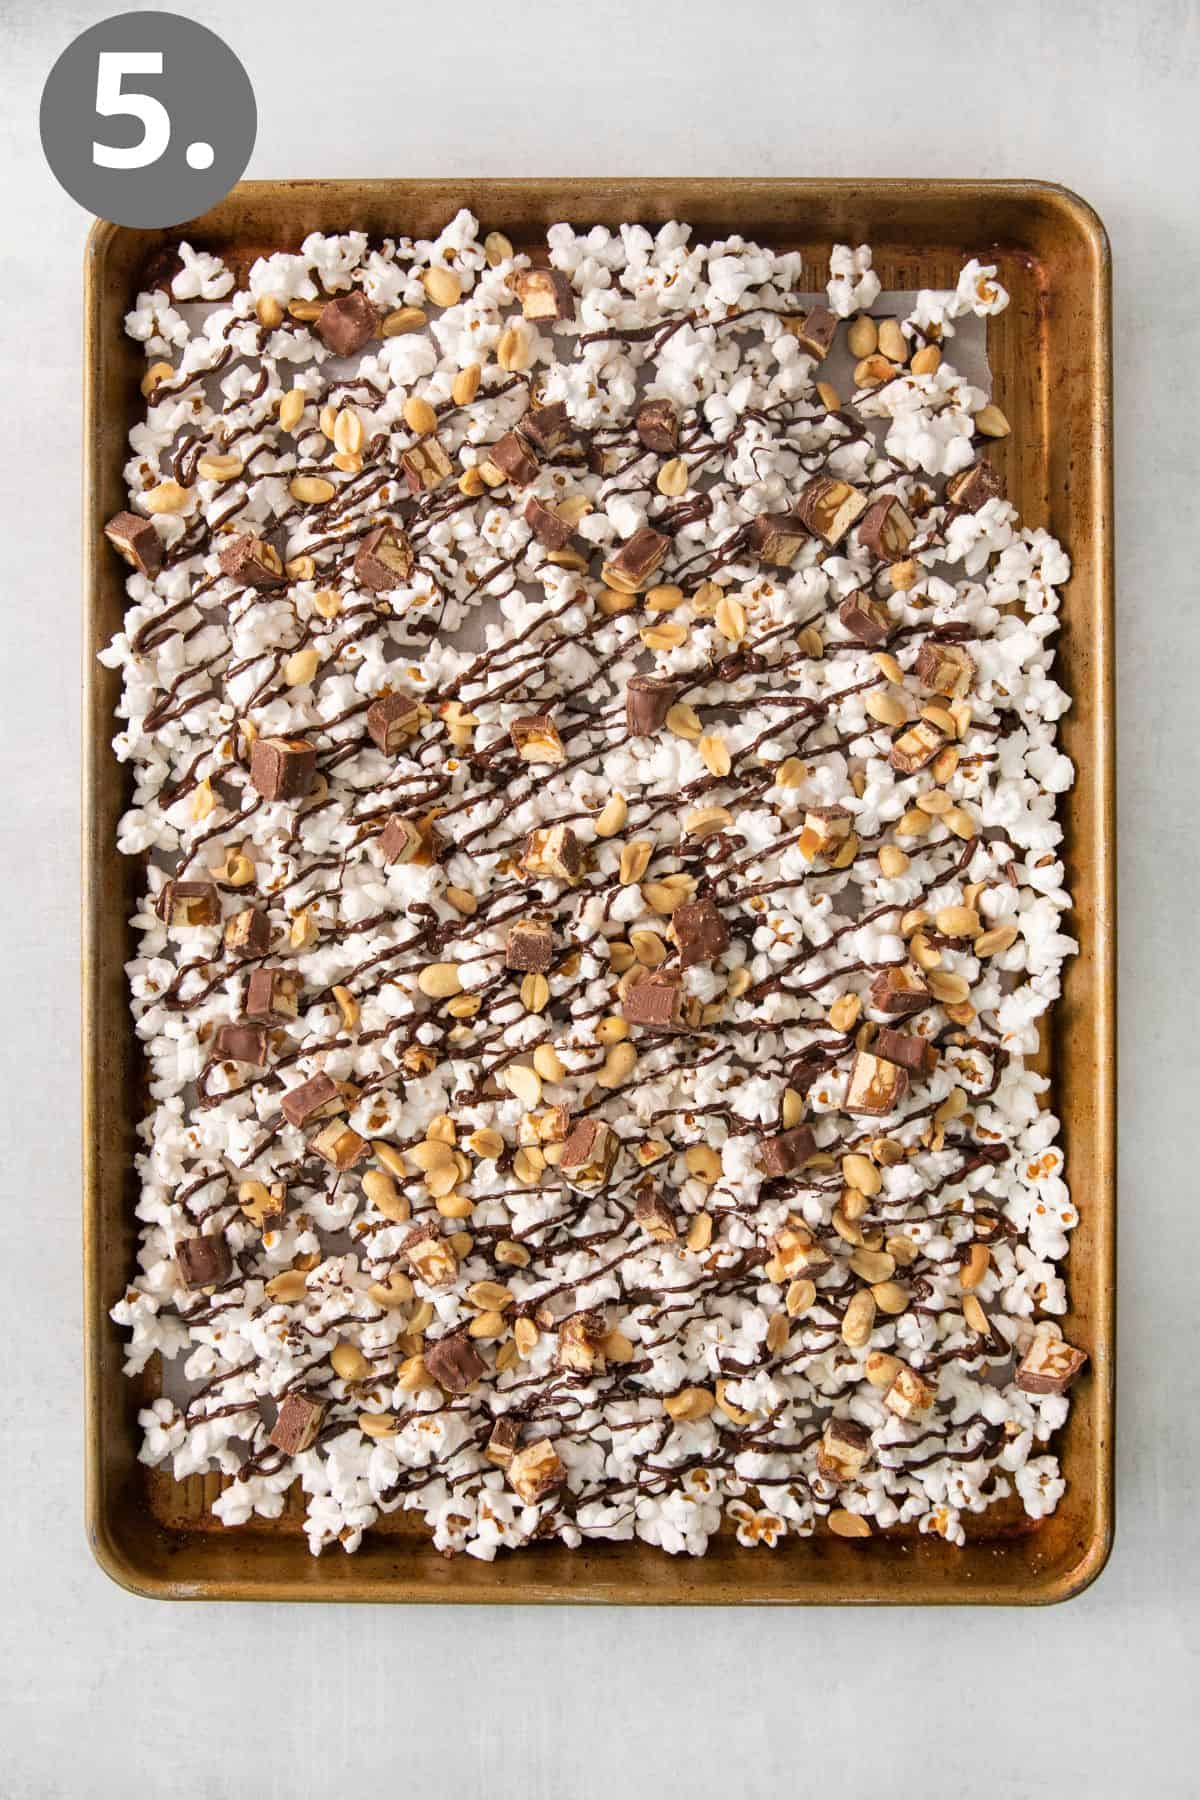 Popcorn drizzled with chocolate, Snickers bars, and peanuts